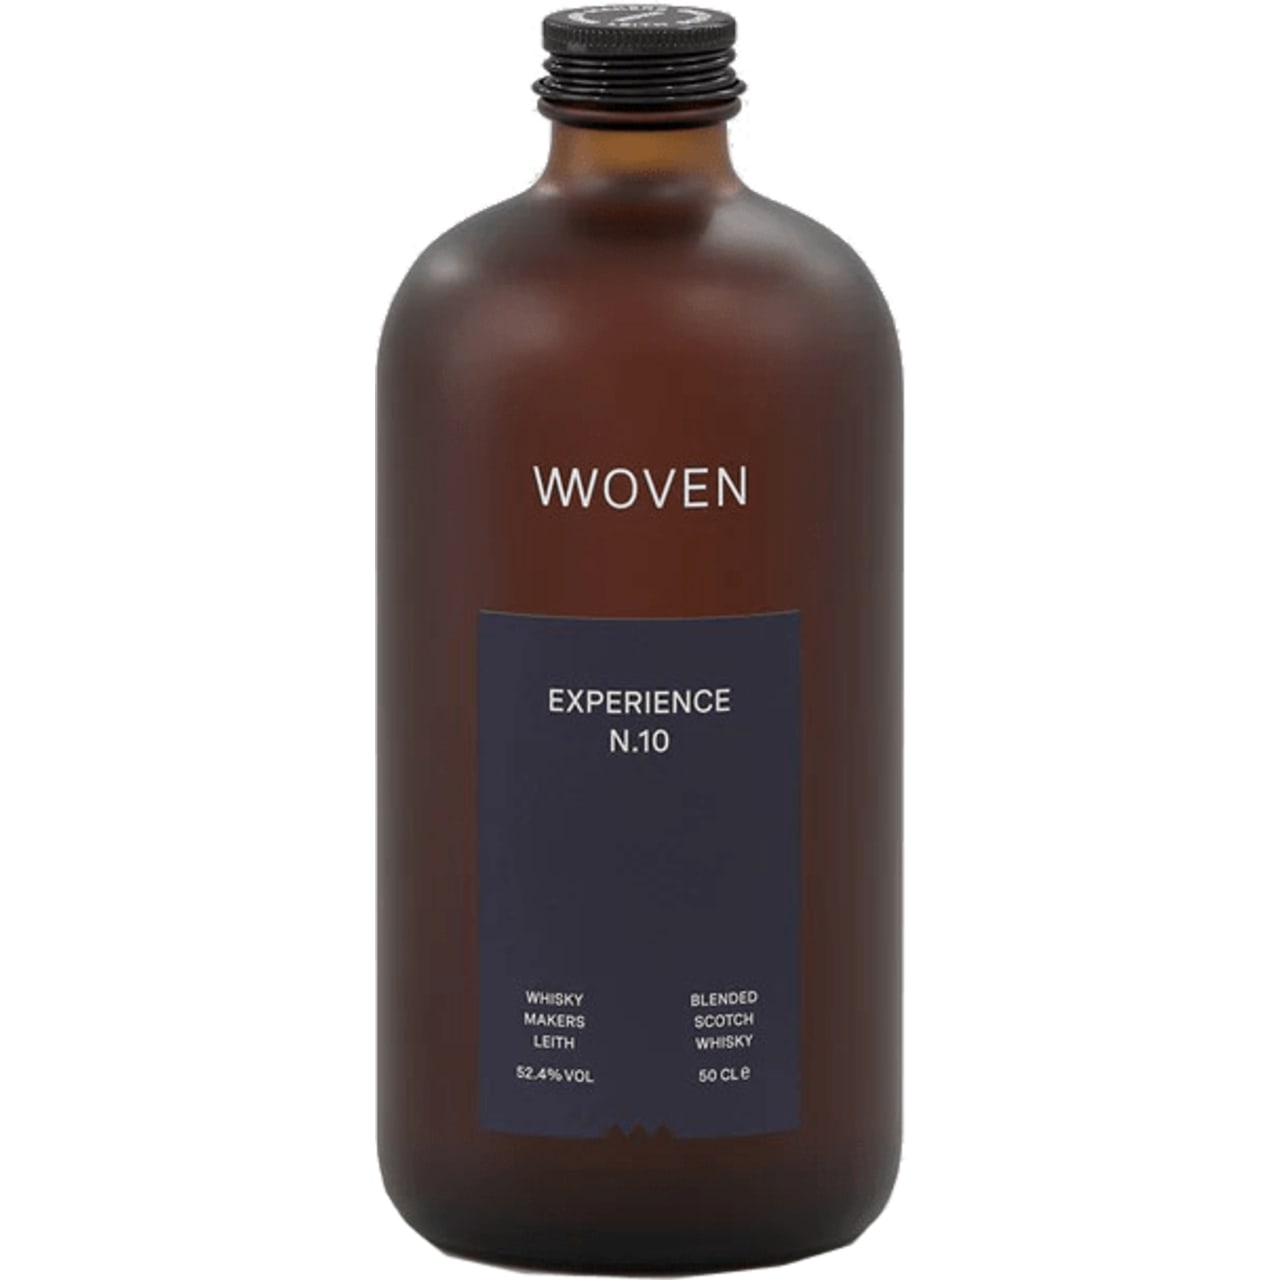 Product Image - Woven Whisky Experience No.10